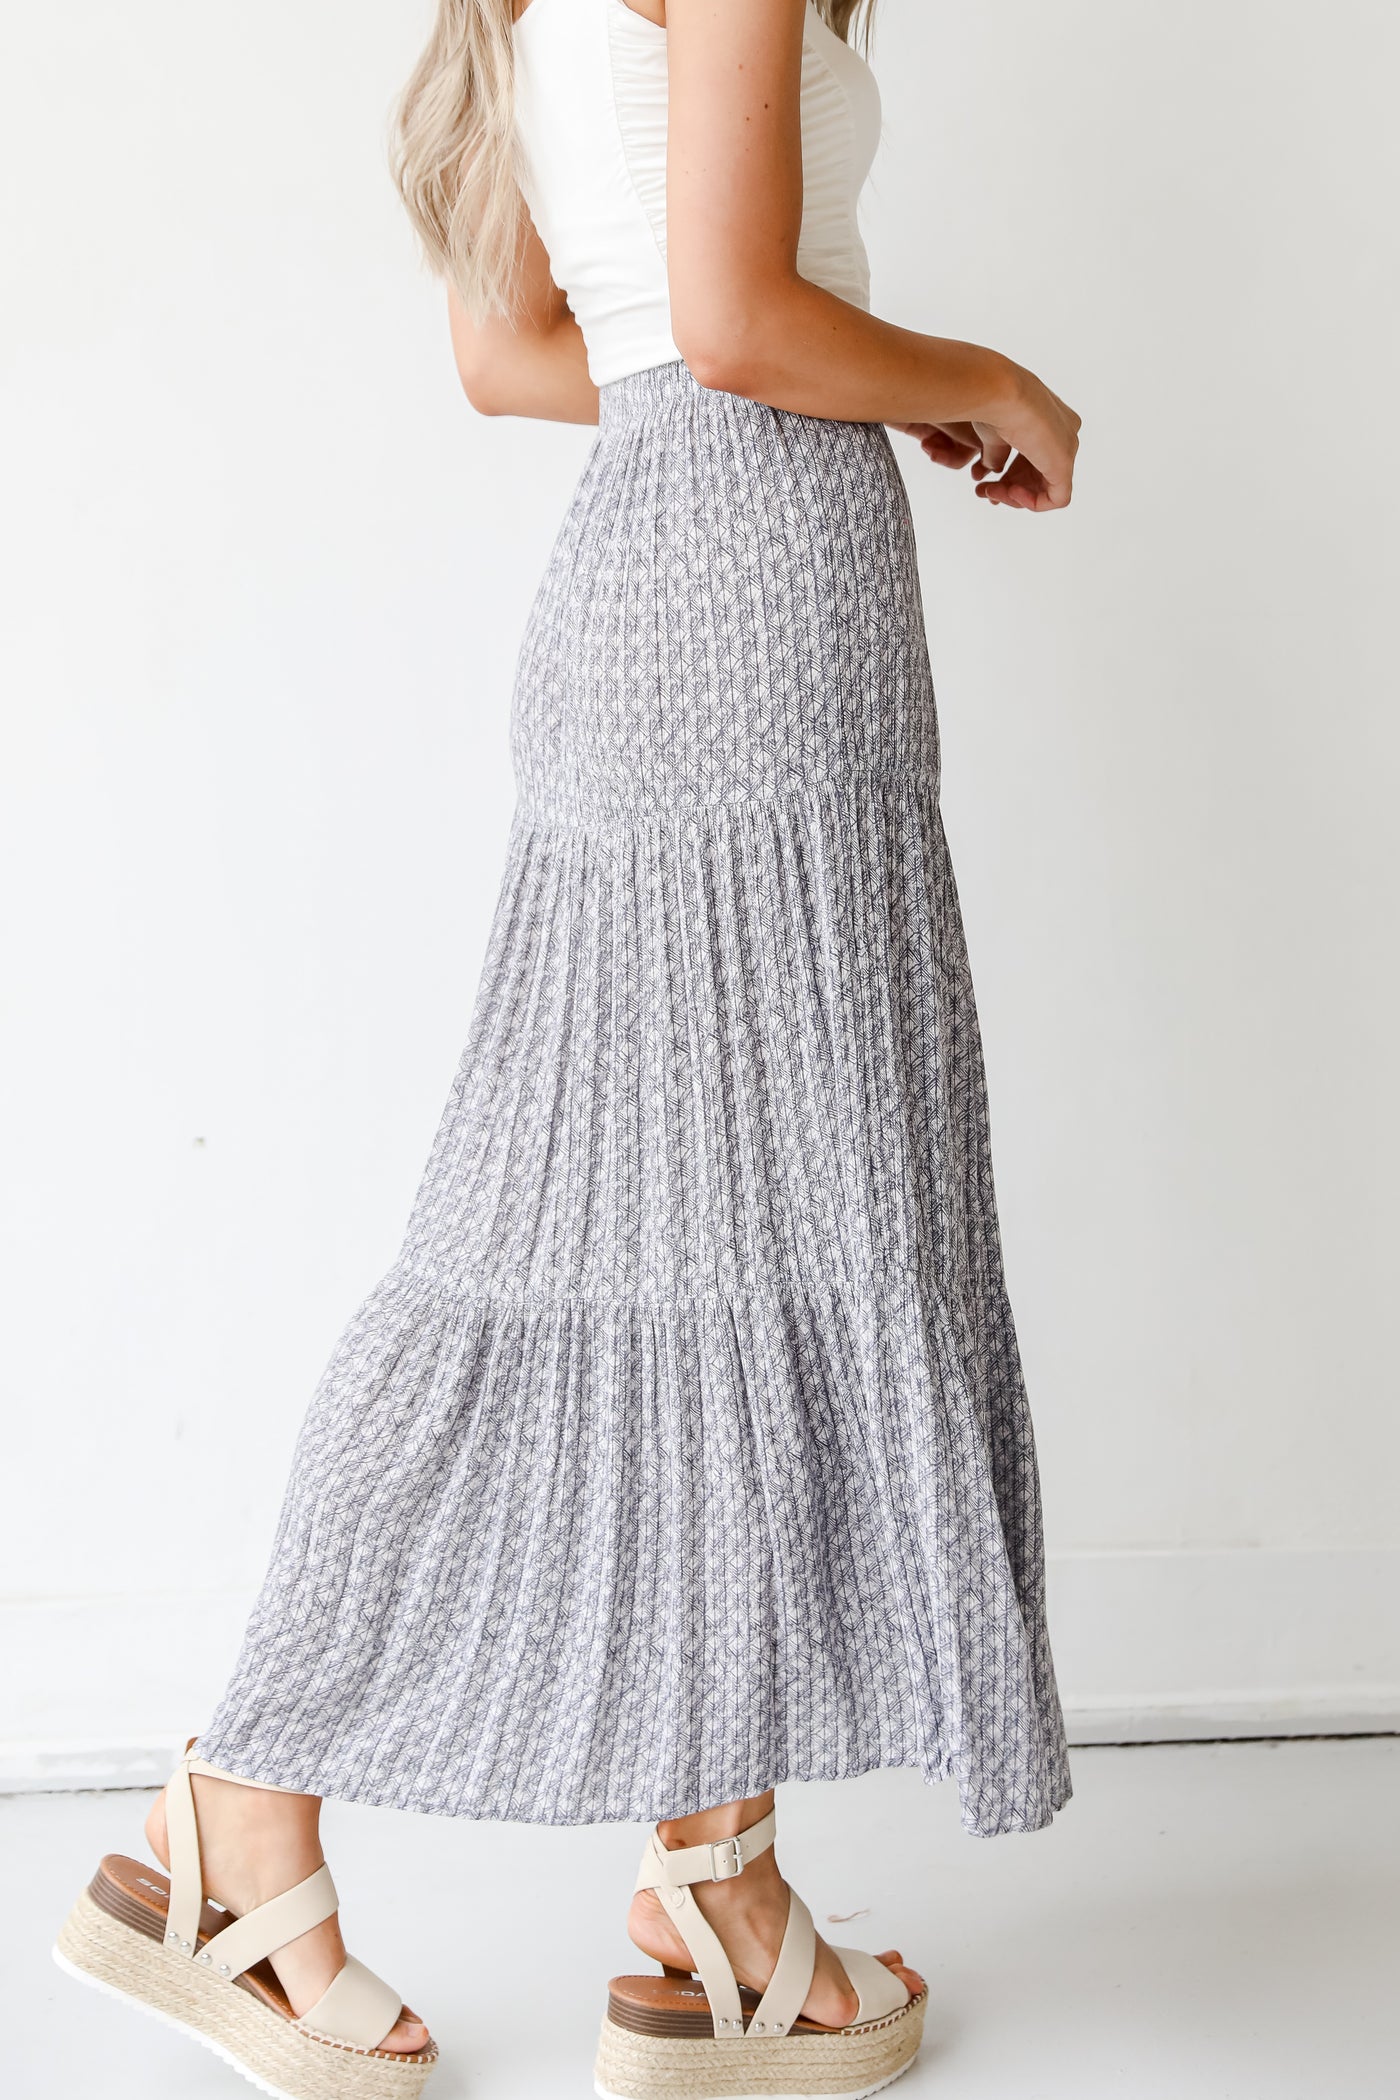 Tiered Maxi Skirt side view